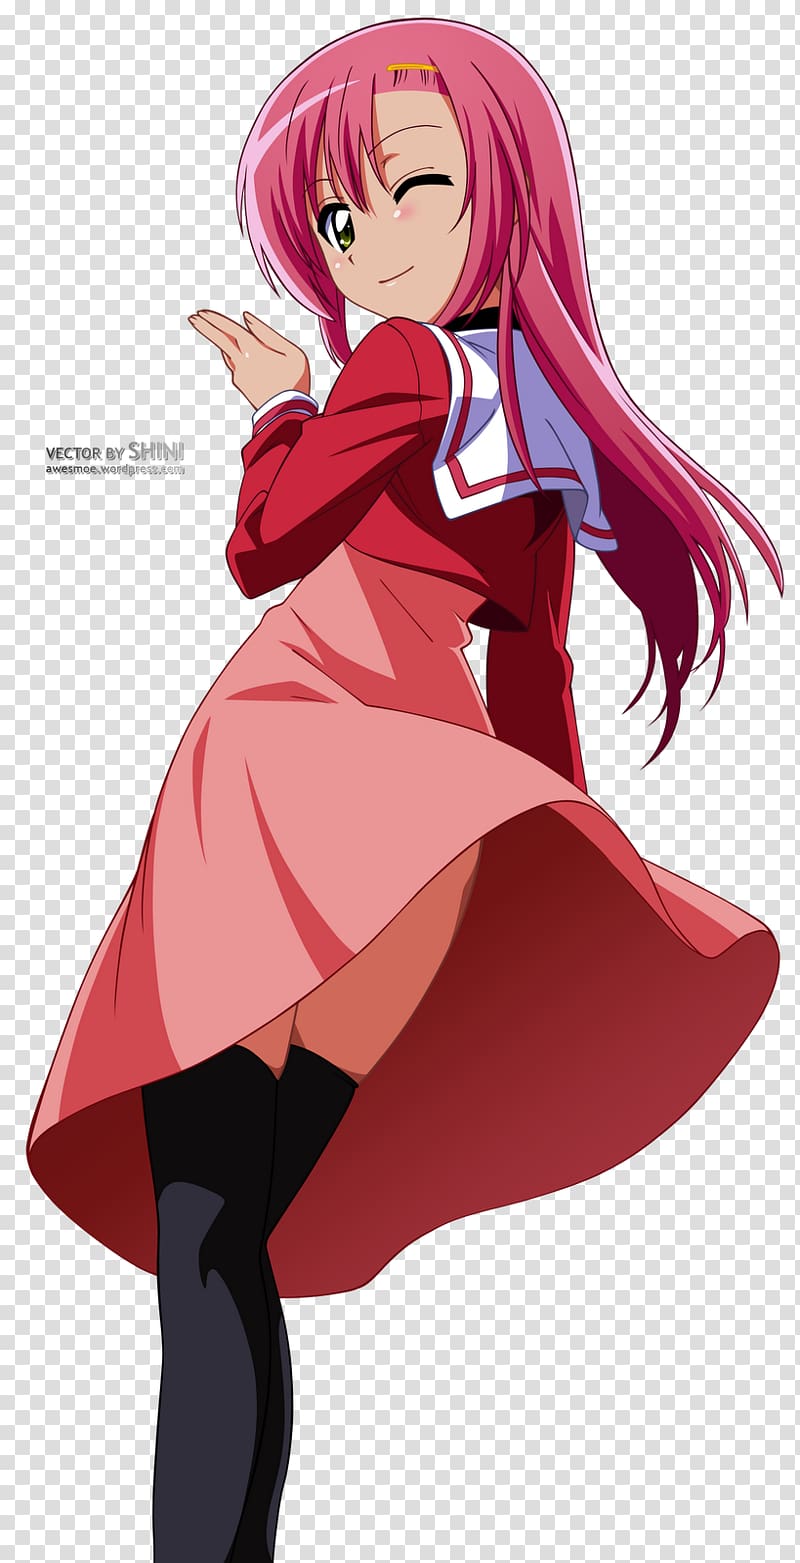 Hayate the Combat Butler 桂ヒナギク Anime Moe Mangaka, music staf transparent background PNG clipart